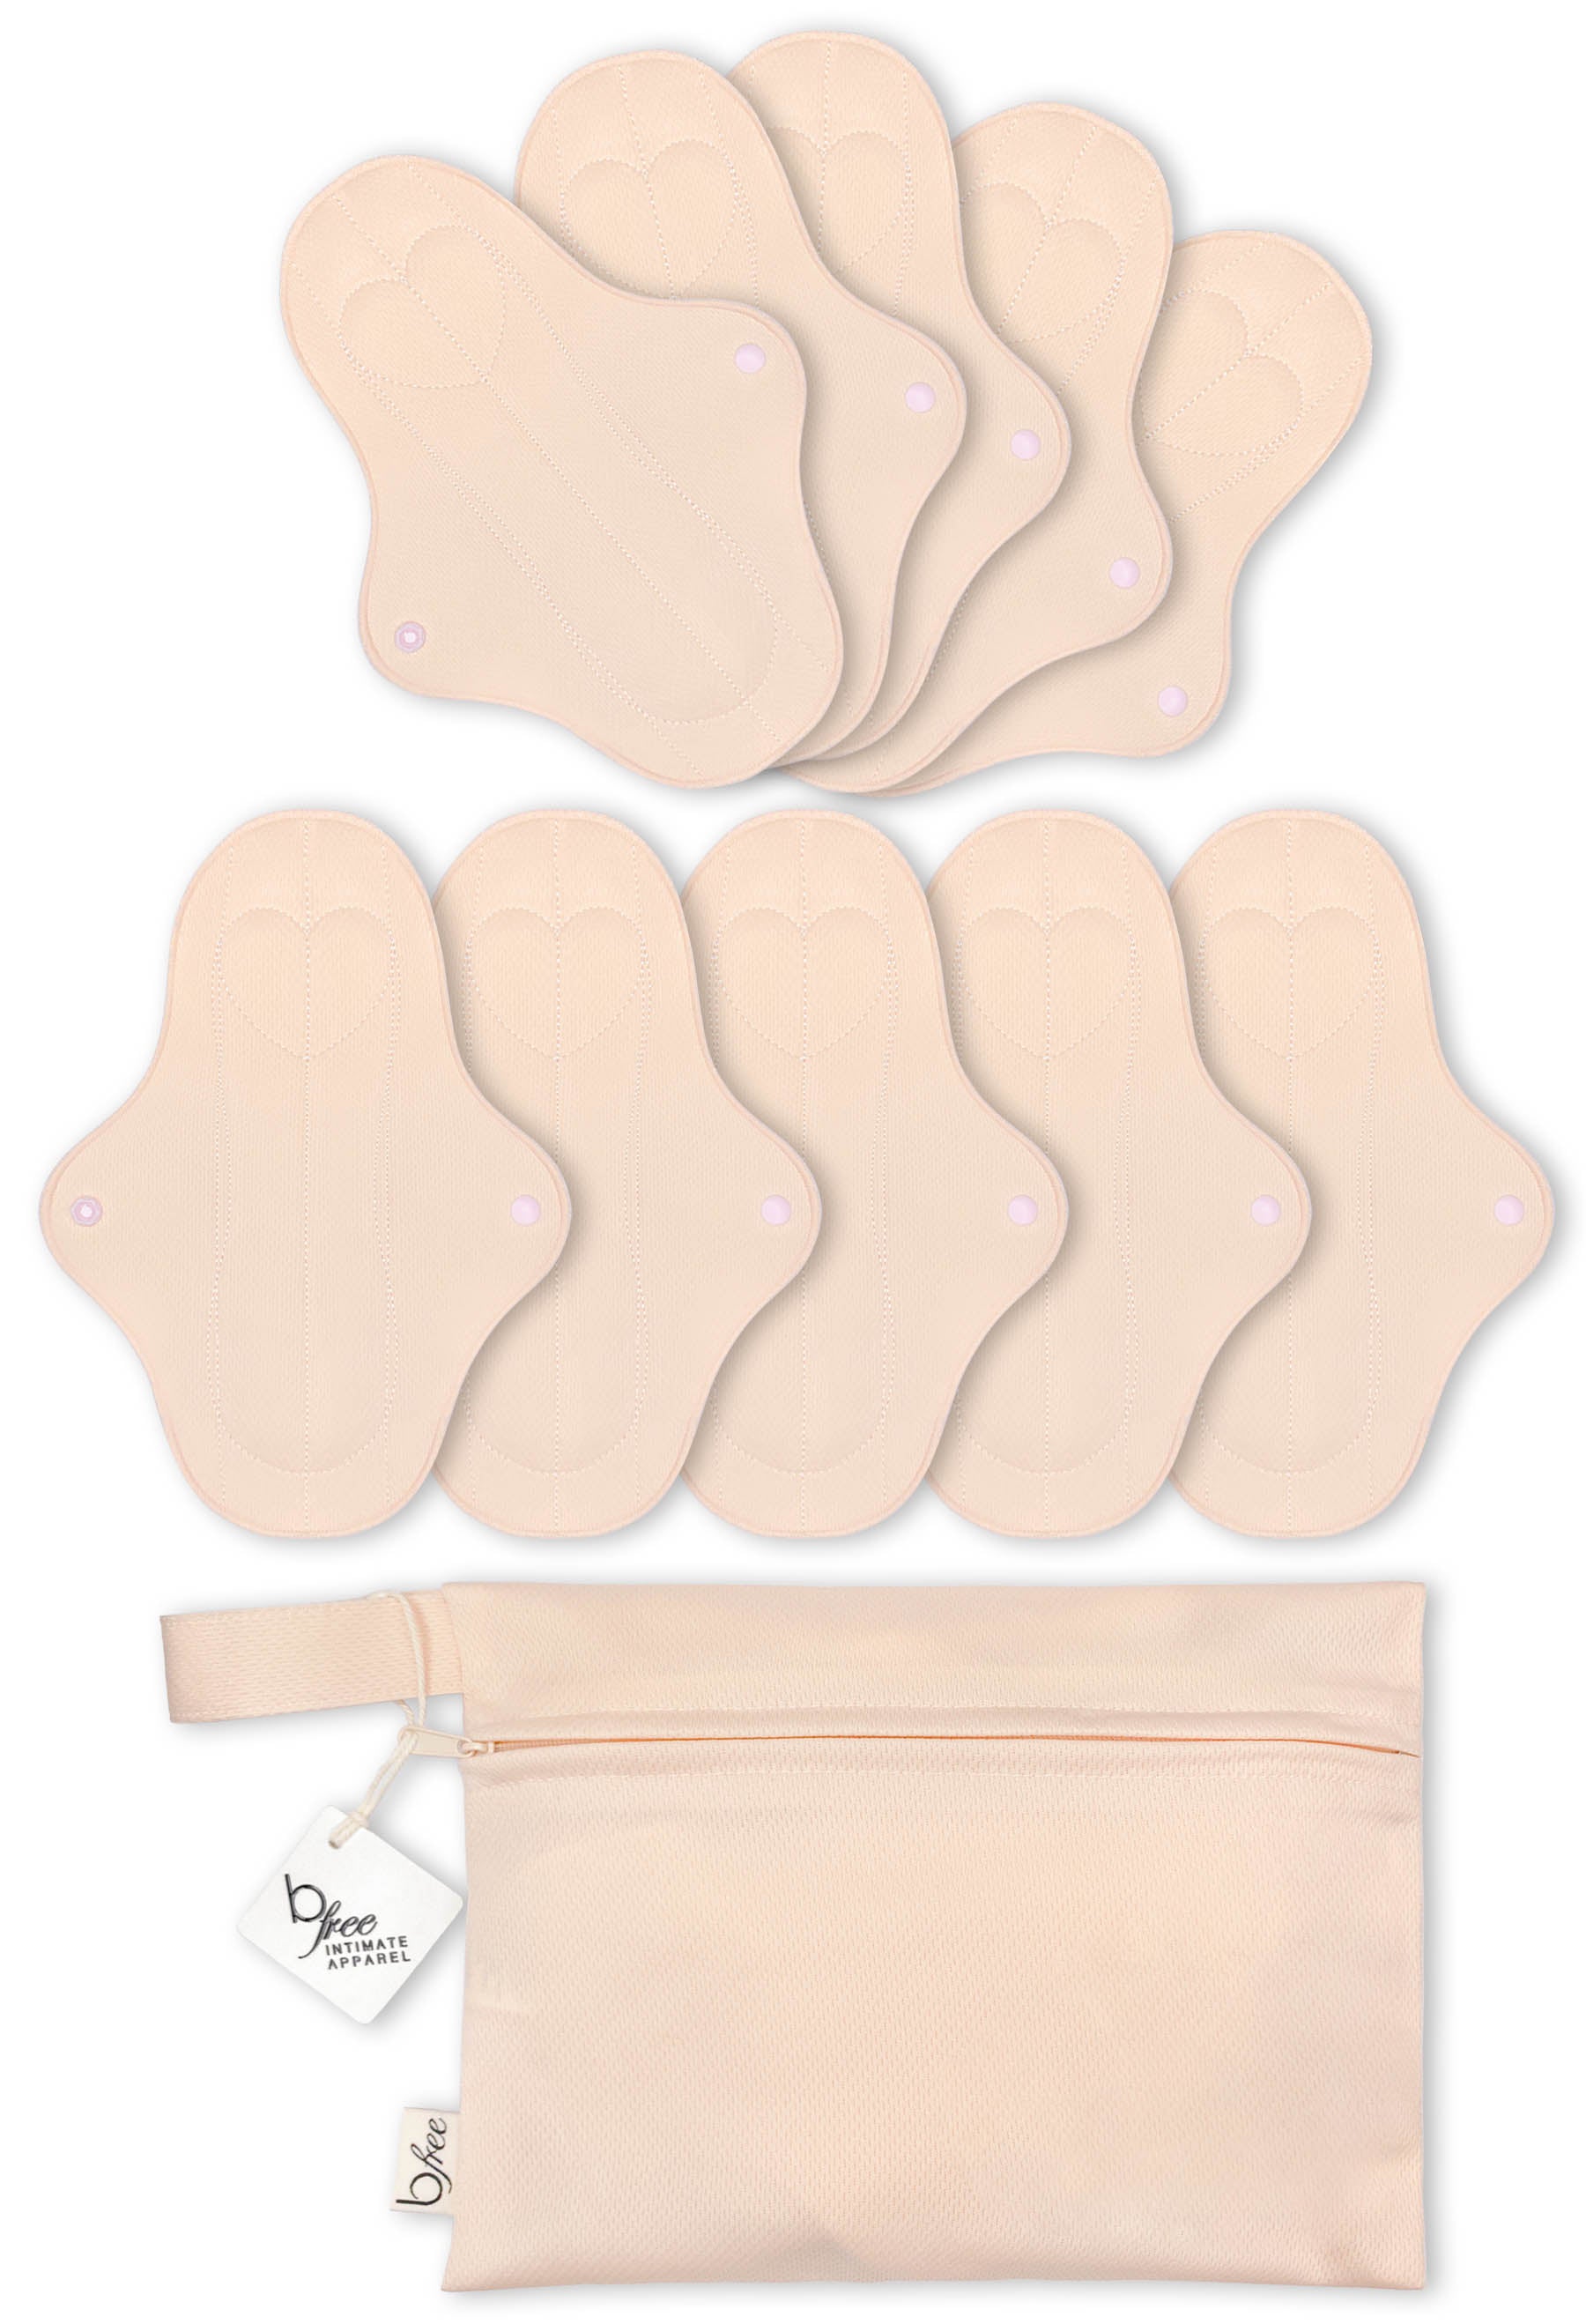 Ultra Thin Small Reusable Panty Liner With Wings - 10 Pack